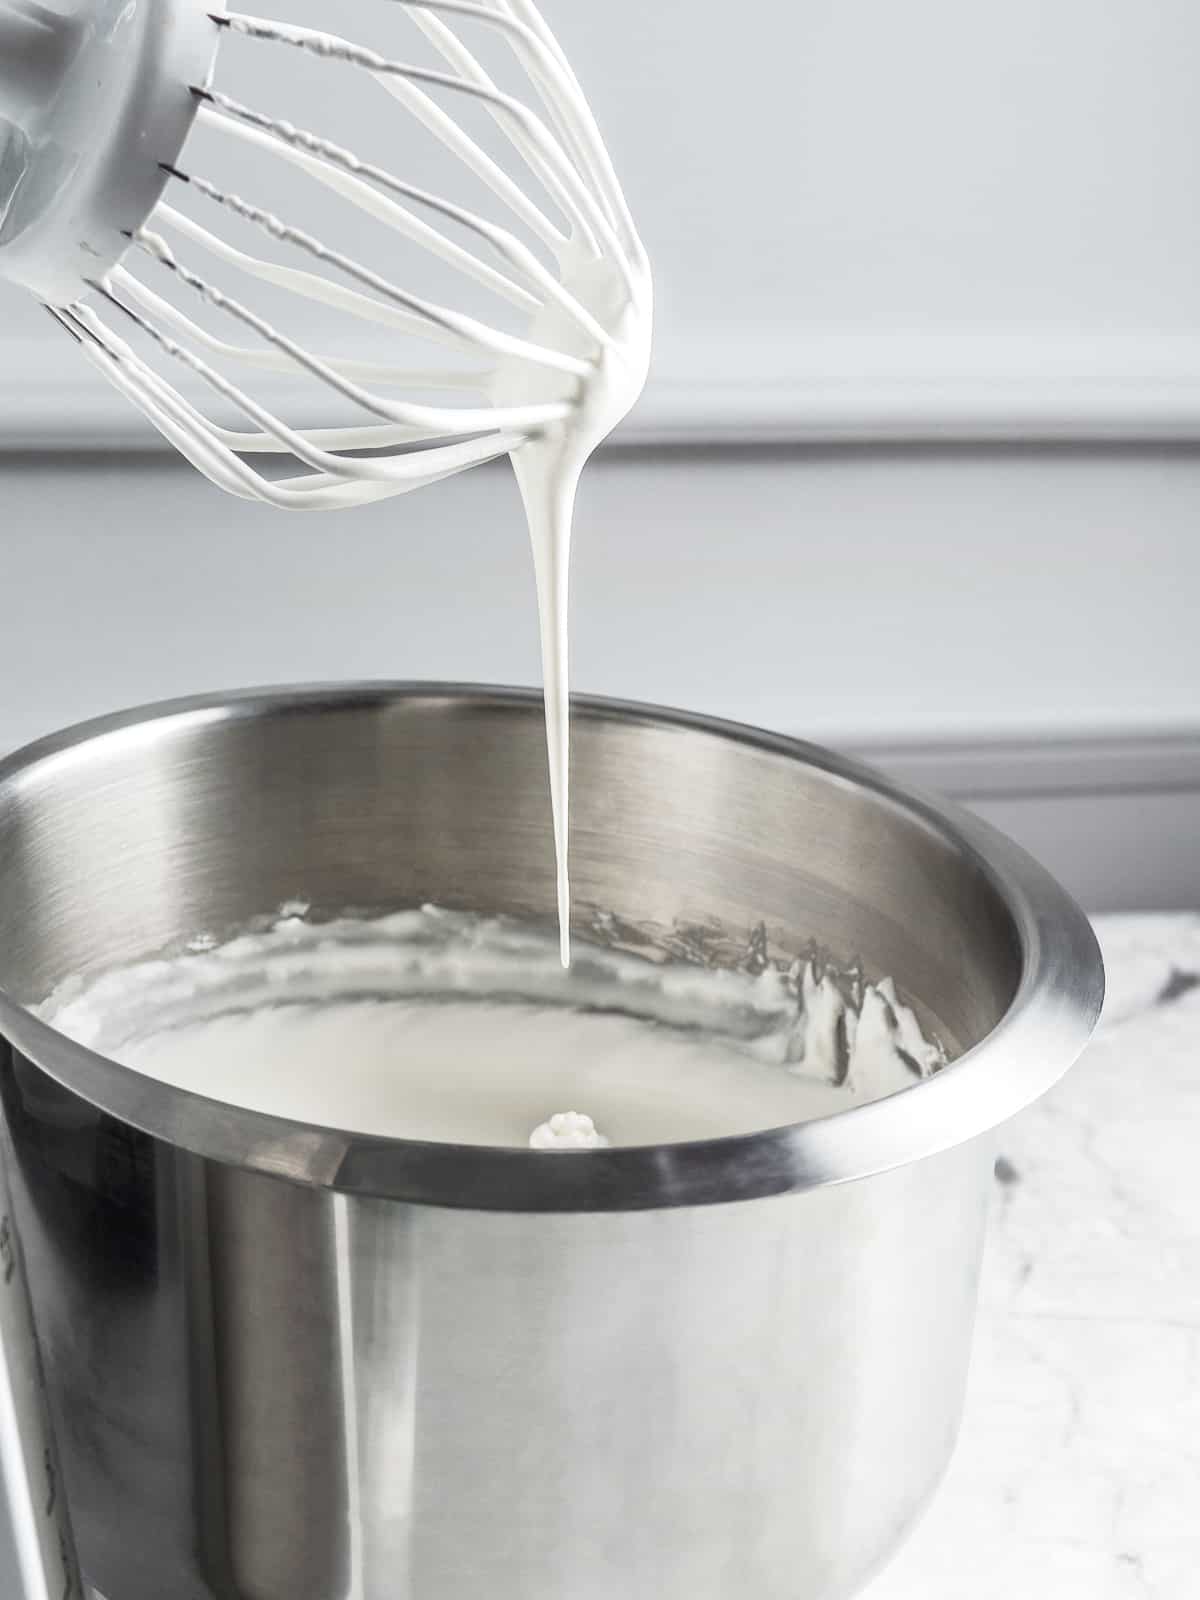 Chantilly cream with a soft peak at the tip of the whisk